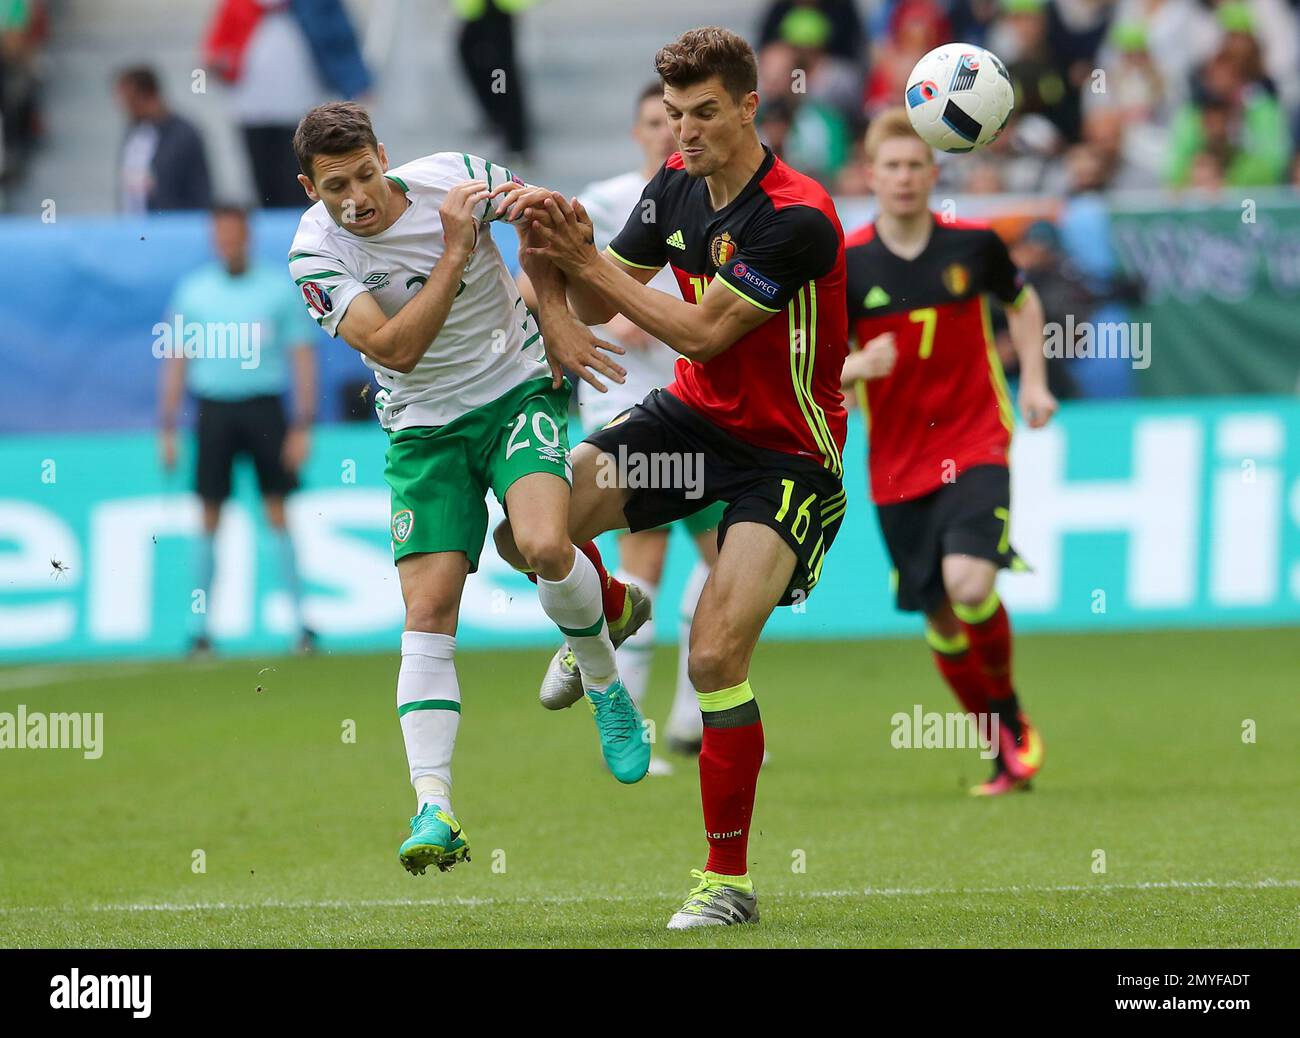 Ireland's Wes Hoolahan, left, and Belgium's Thomas Meunier go for the ball  during the Euro 2016 Group E soccer match between Belgium and Ireland at  the Nouveau Stade in Bordeaux, France, Saturday,